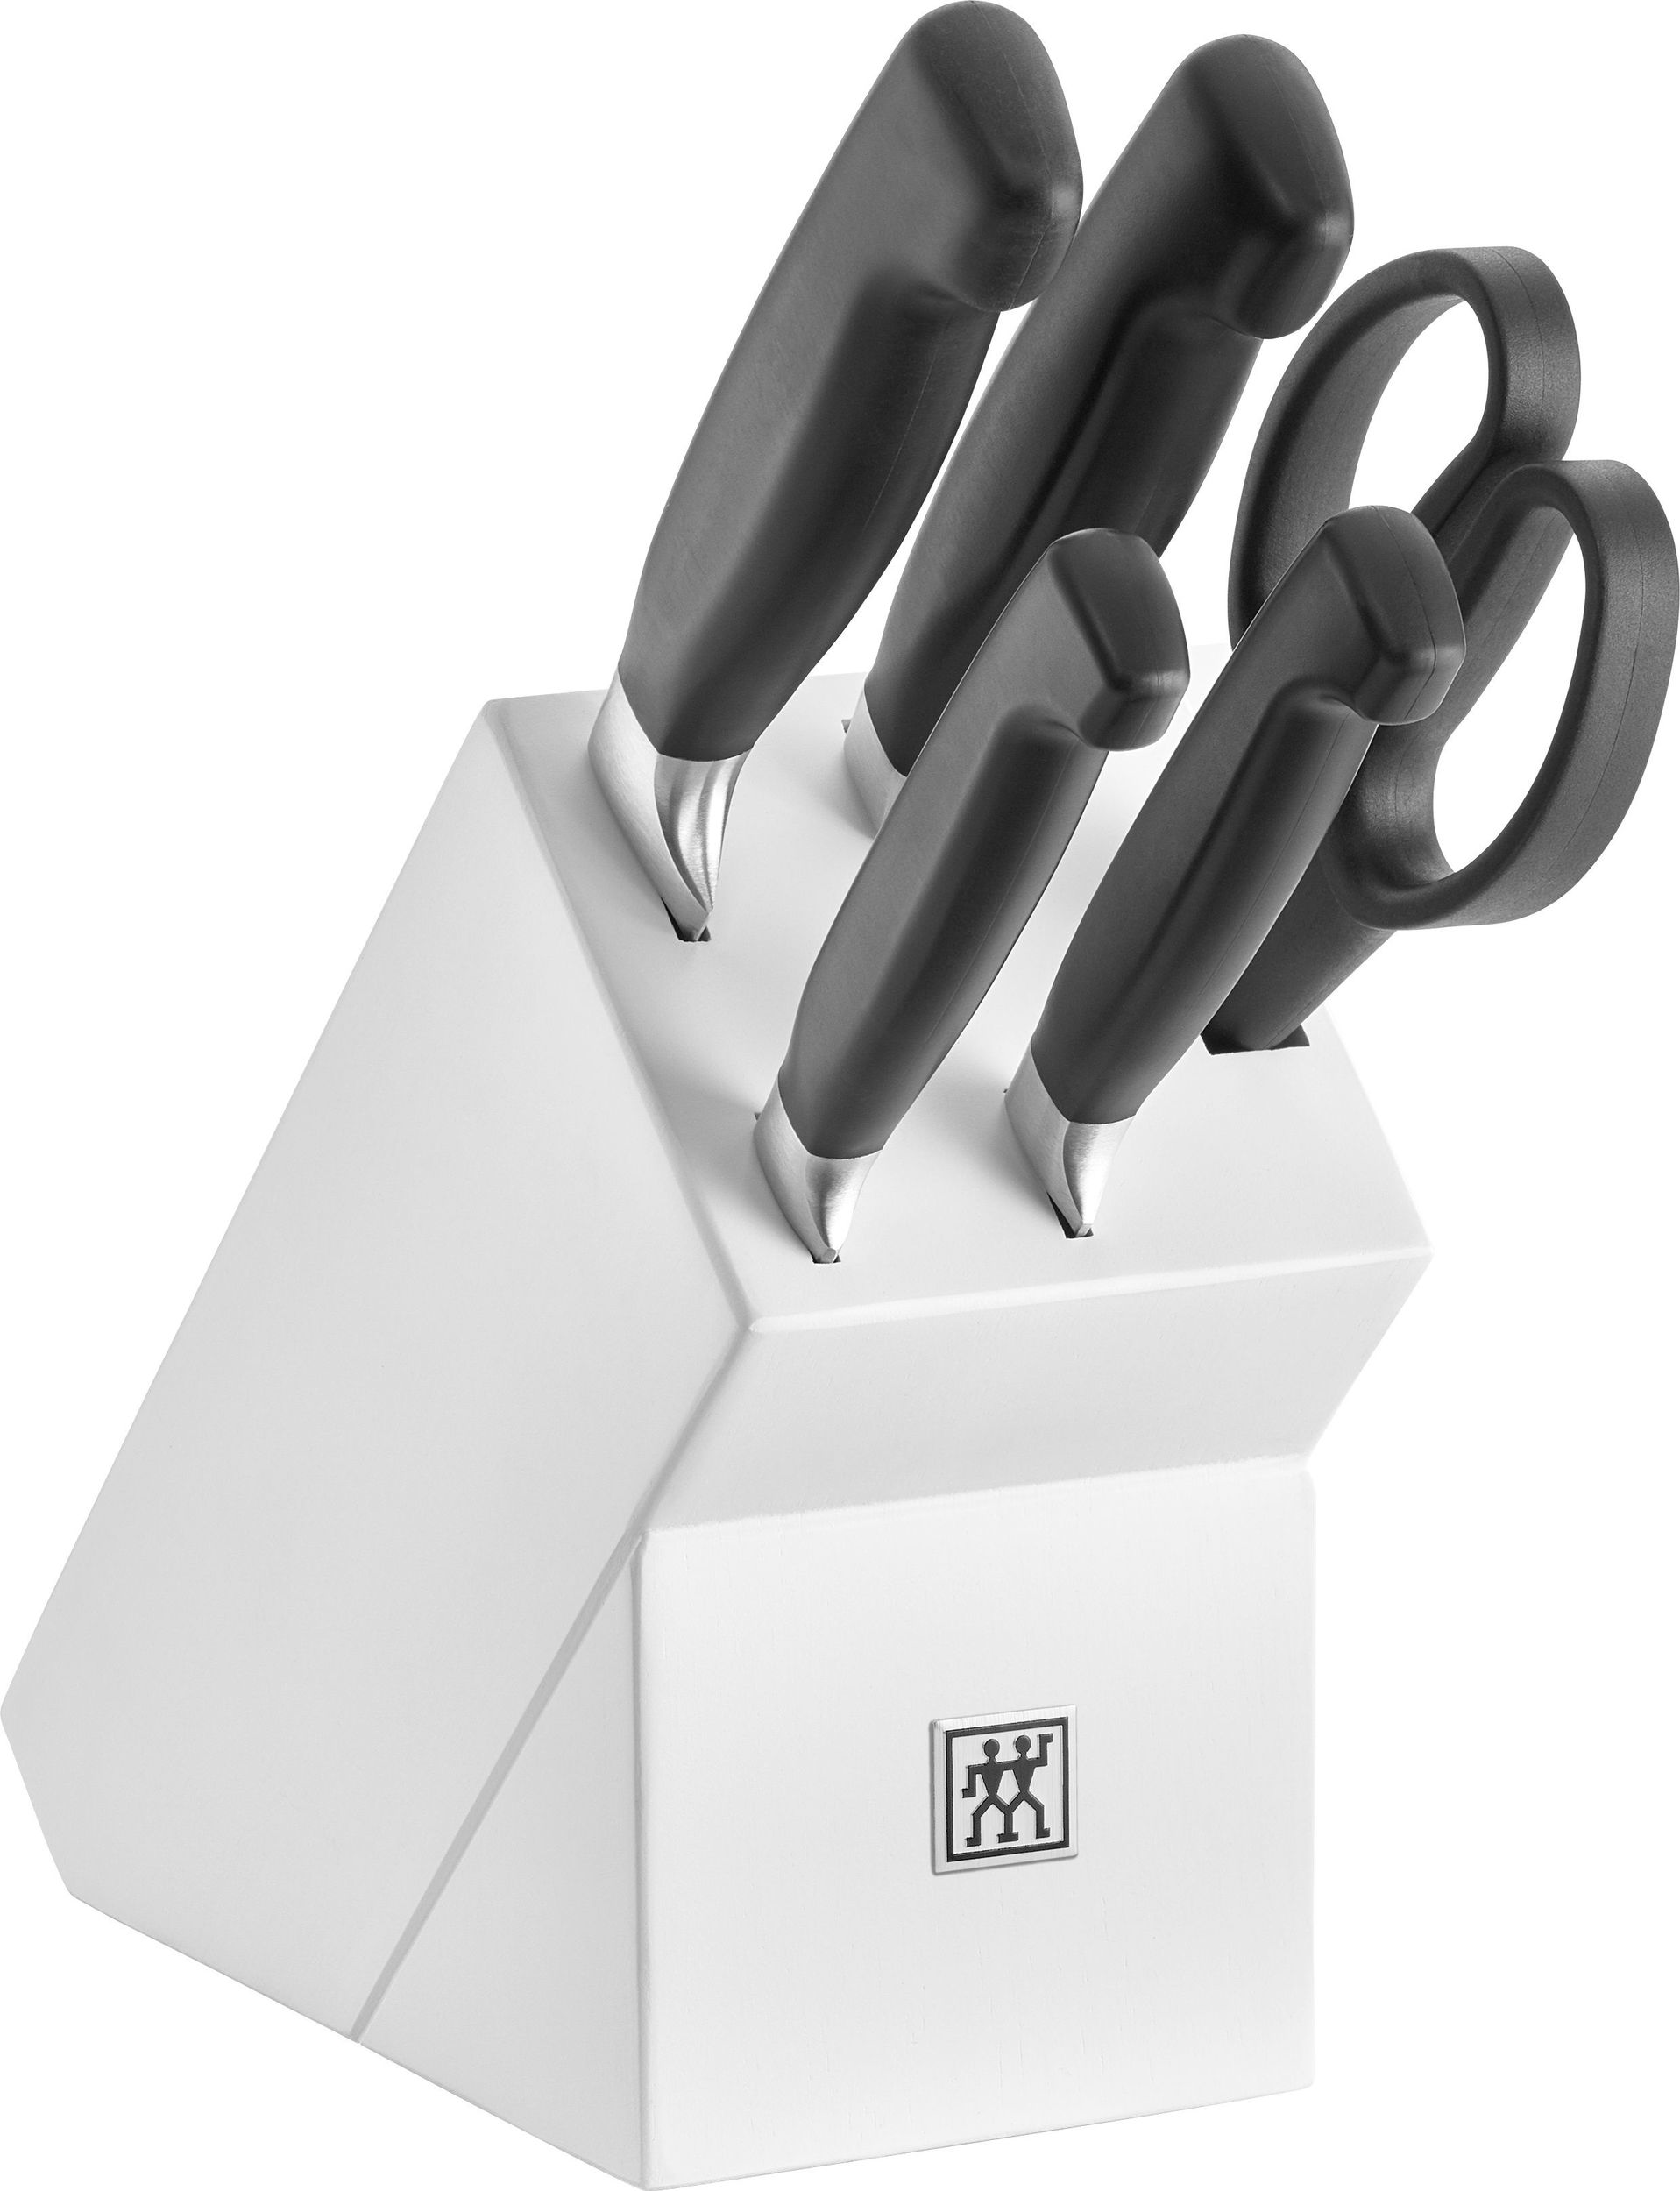 Four Star Block with 4 knives and scissors - Zwilling 35021-306-0